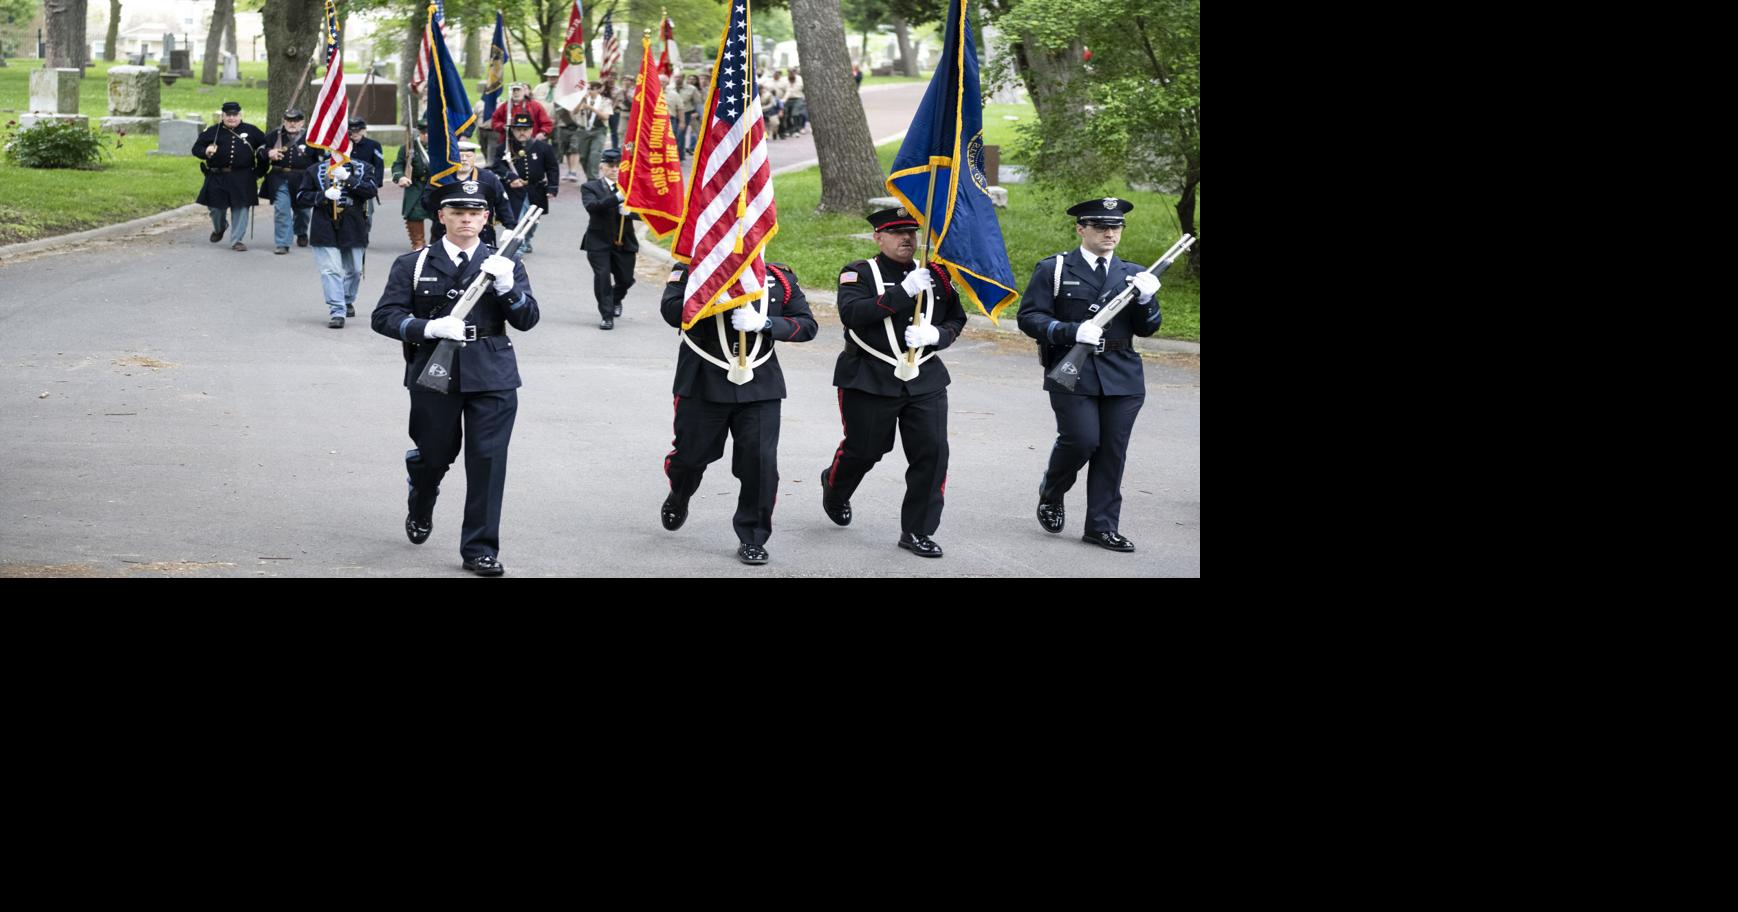 Public invited to Memorial Day ceremonies on Monday